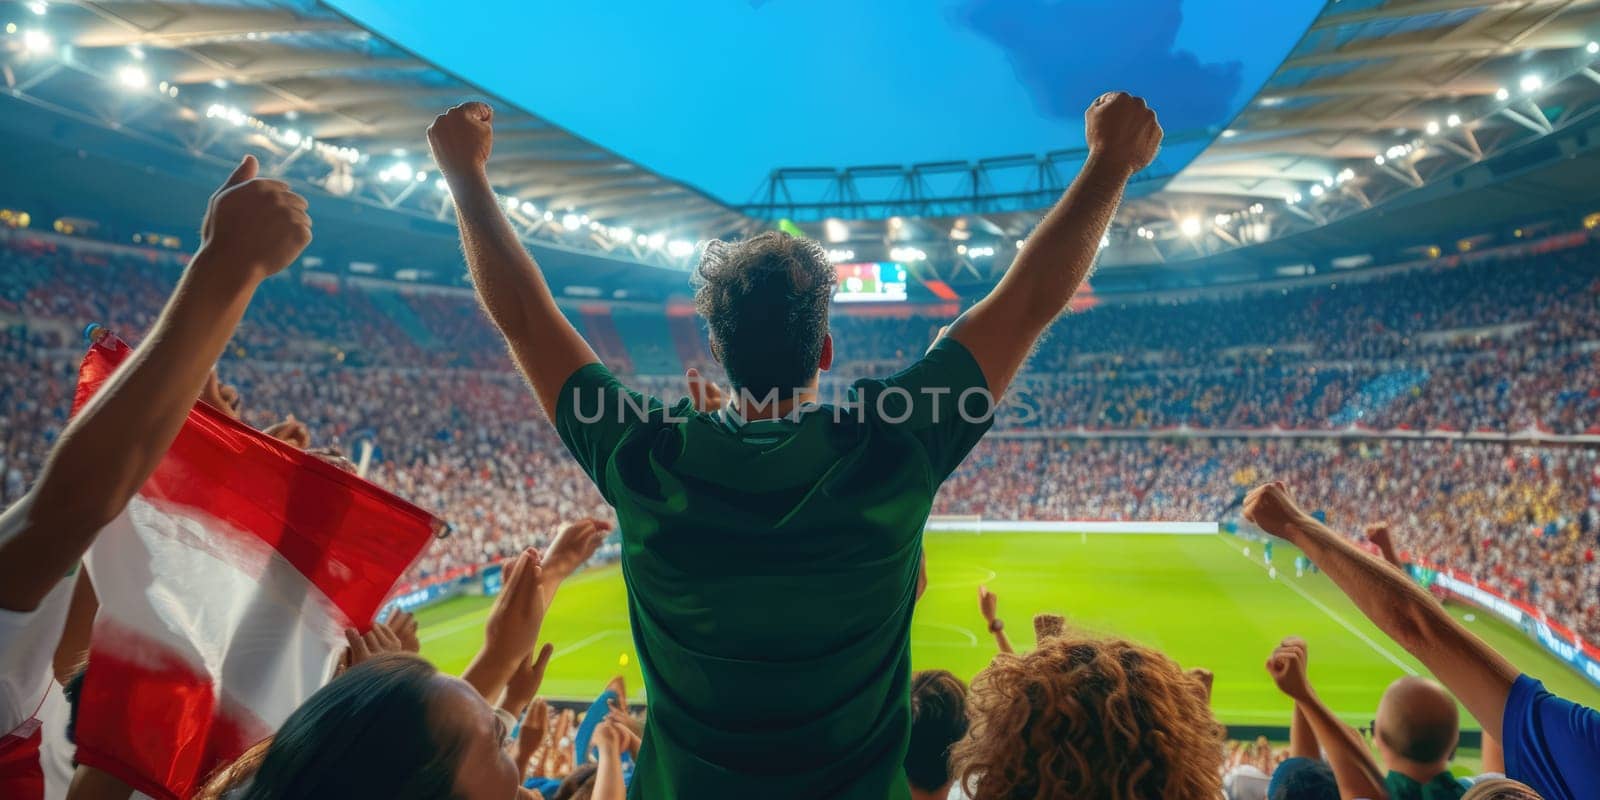 A fan at a soccer match joyfully celebrates a thrilling event, raising his arms in excitement. The Cup match provides entertainment and fun for leisure seekers. AIG41